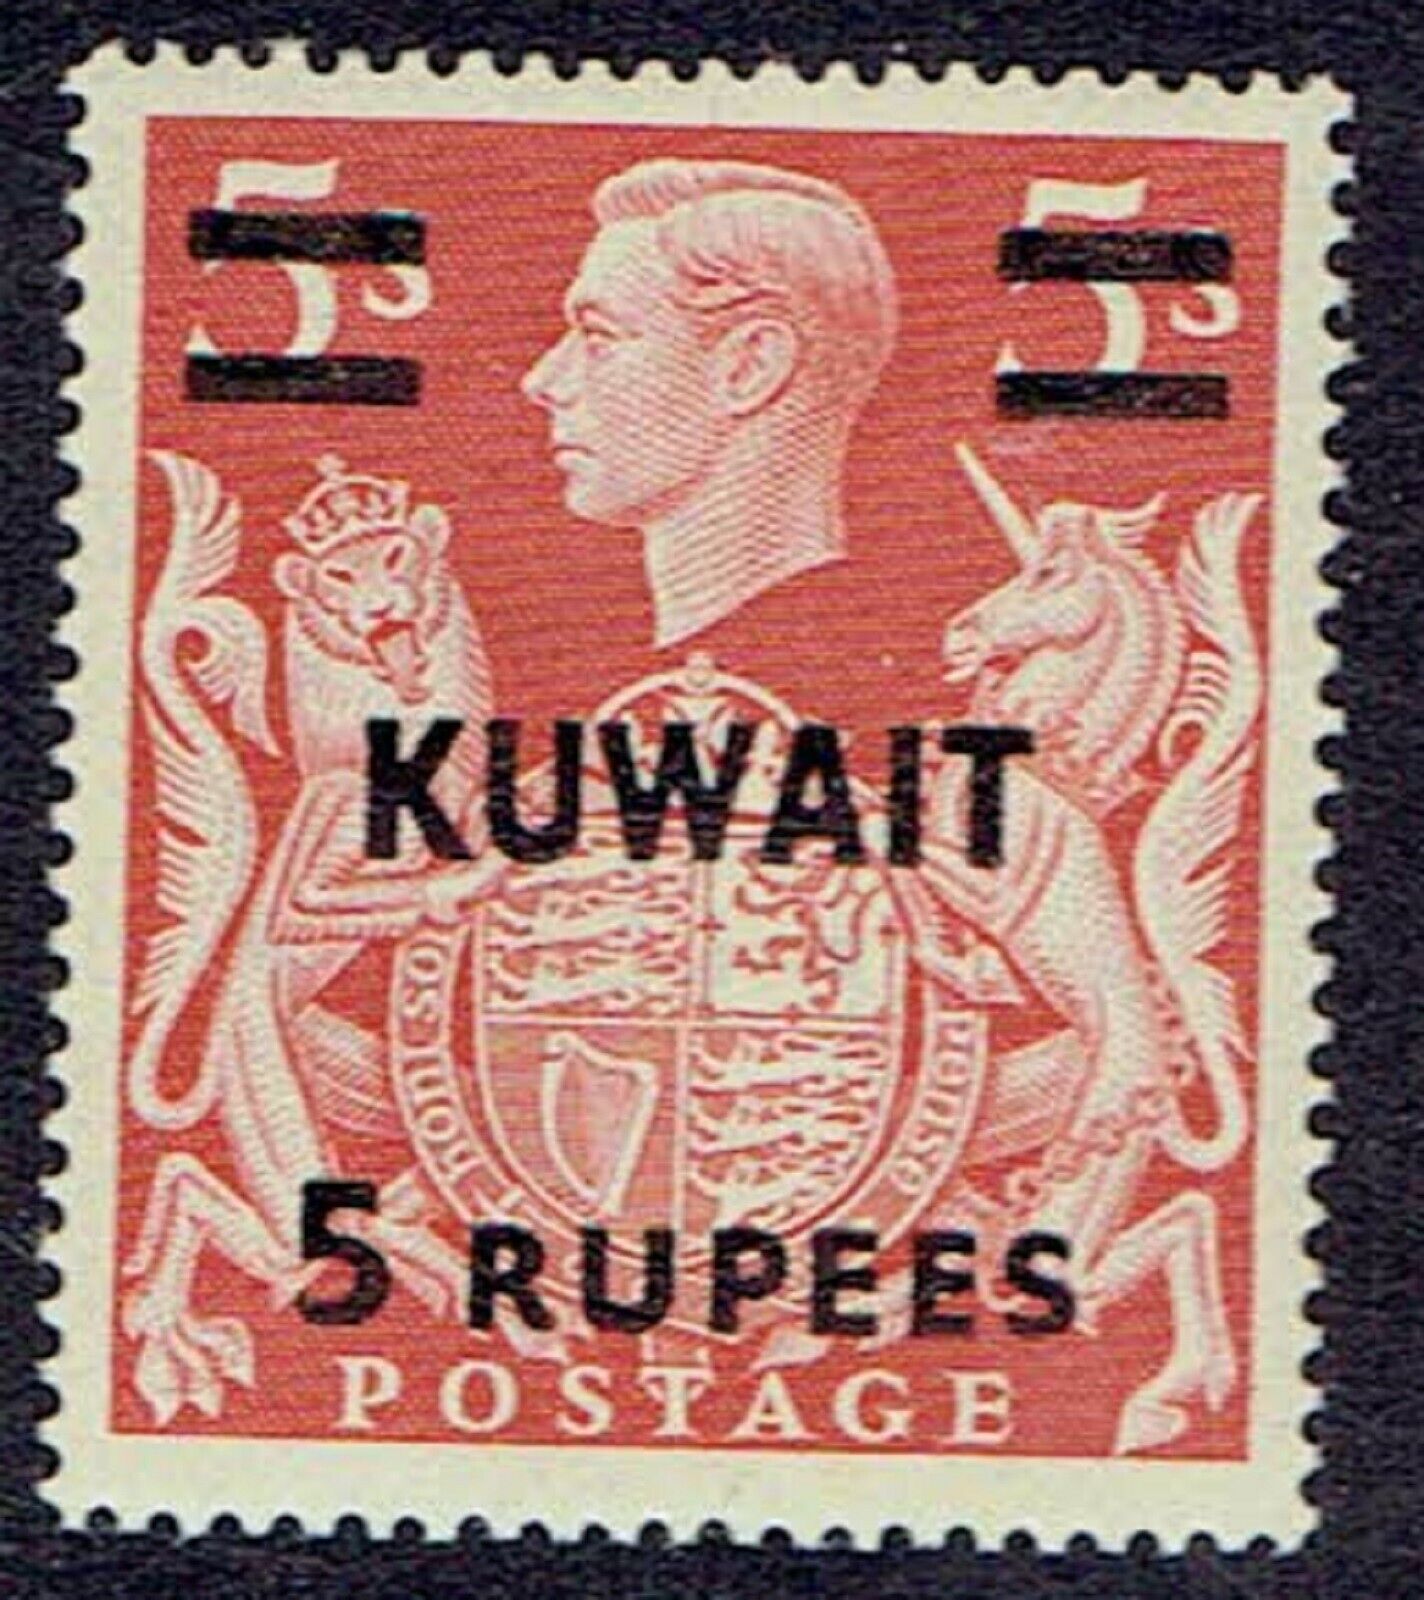 Kuwait OFFicial mail order 1948 sg73 Cheap 5r on - 5 MNH Red